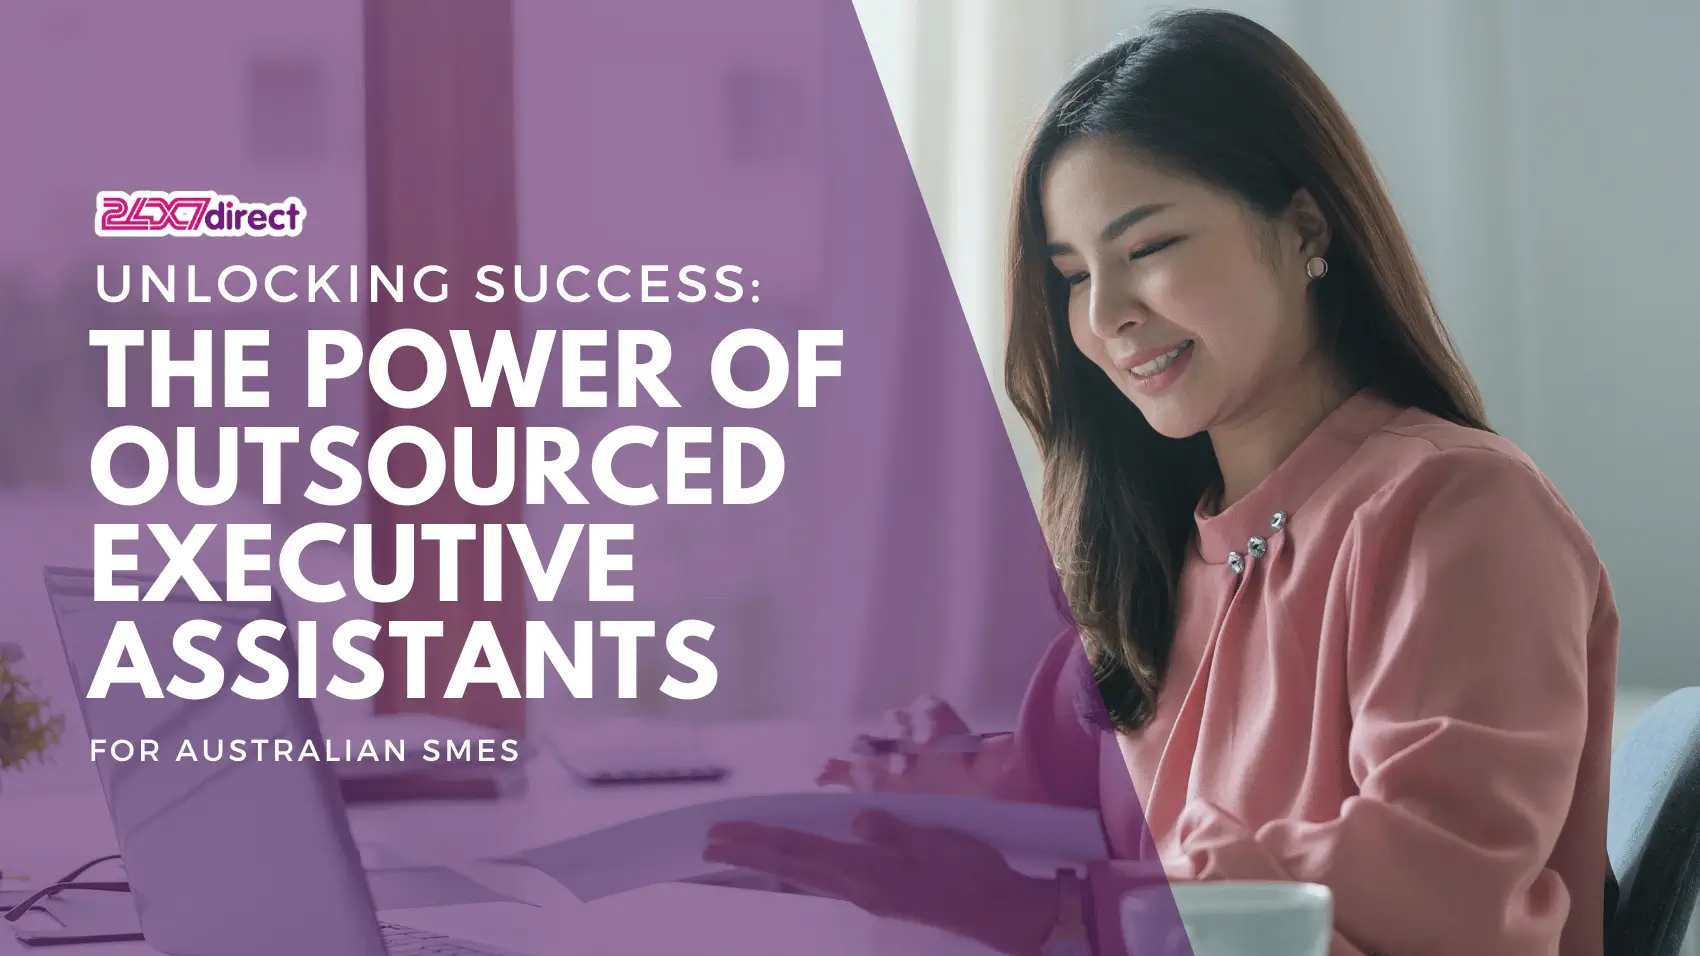 Unlocking Success The Power of Outsourced Executive Assistants for Australian SMEs